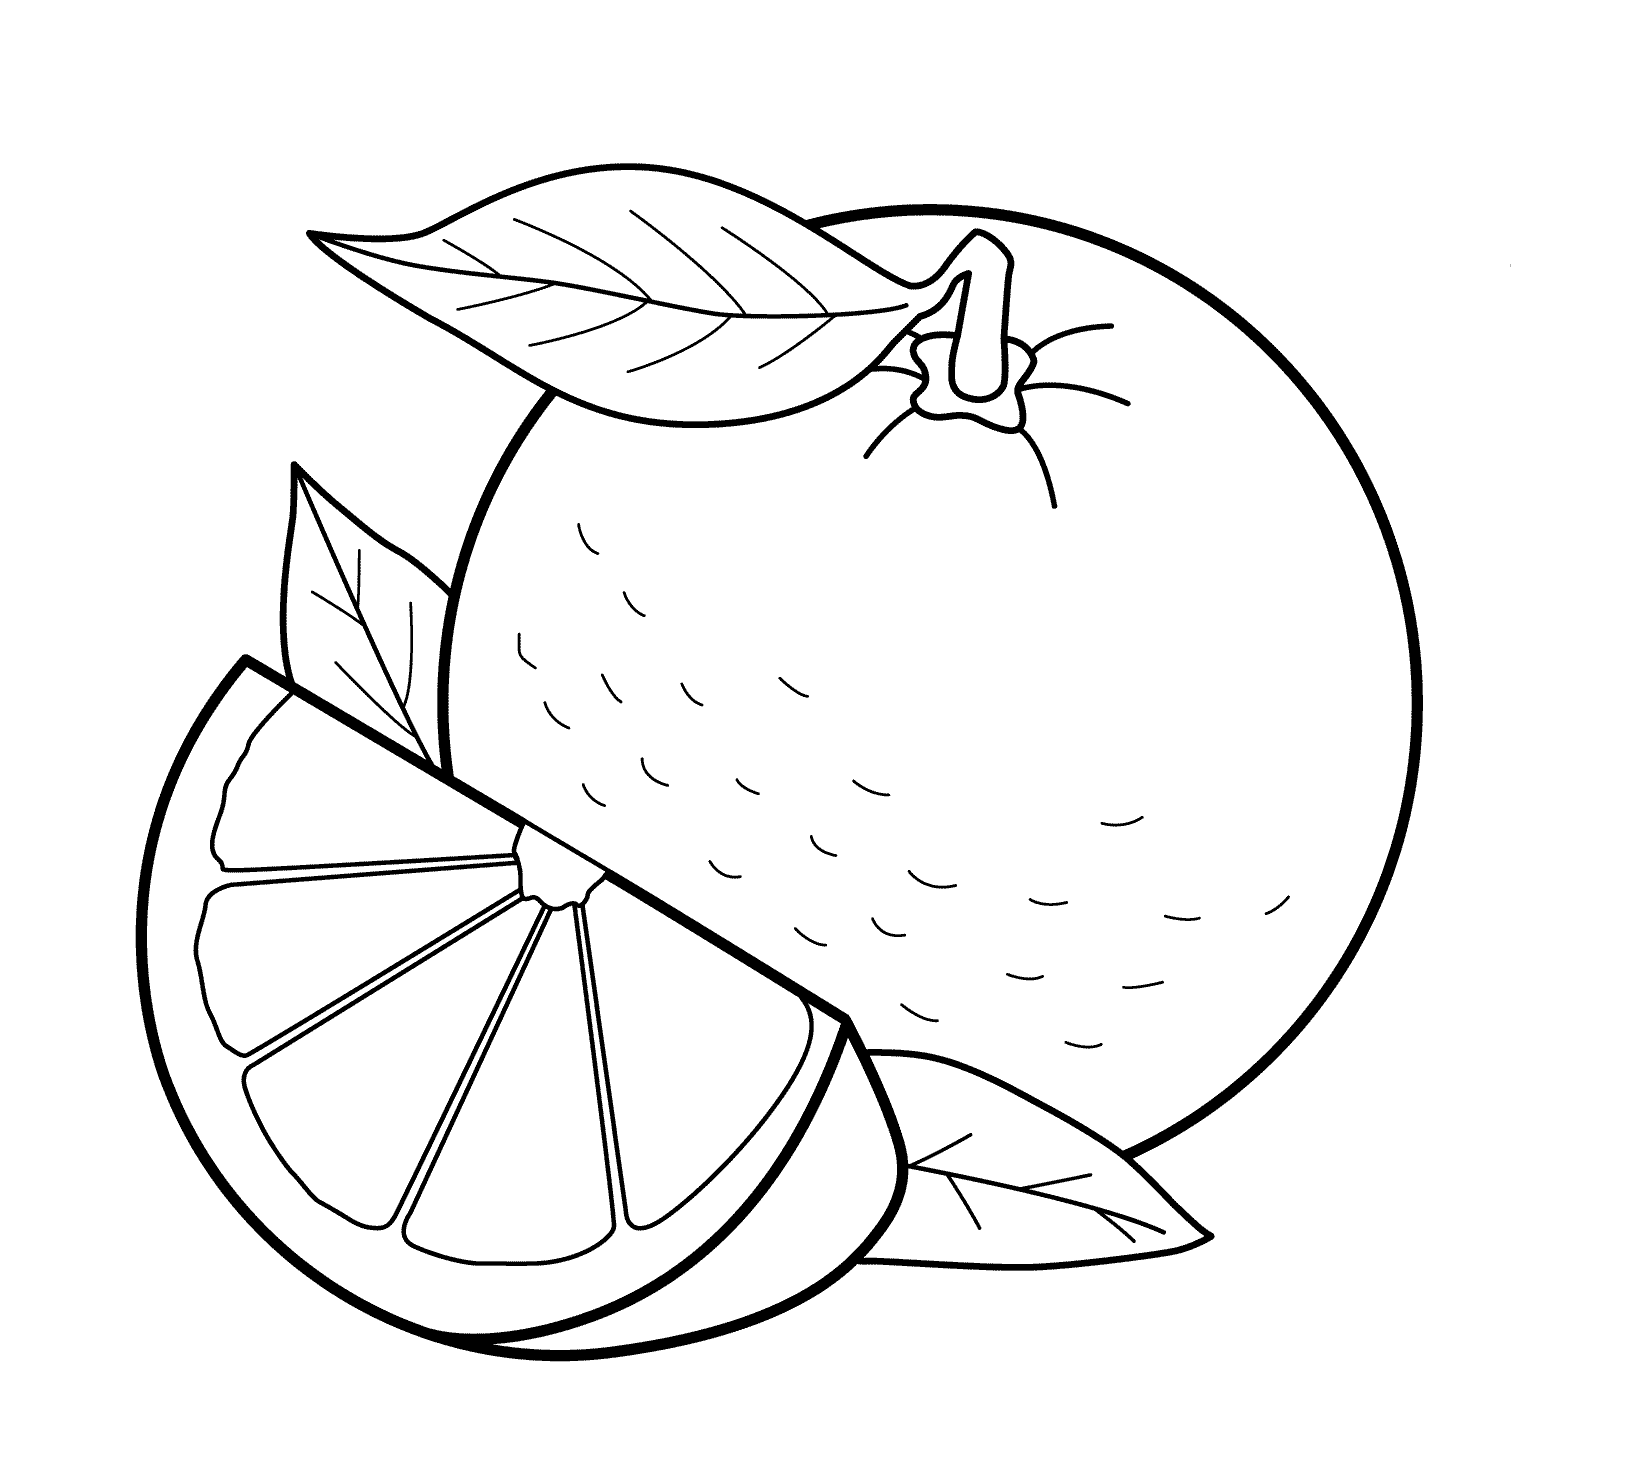 fruit coloring sheets pin about fruit coloring pages on coloring pages at coloring sheets fruit 